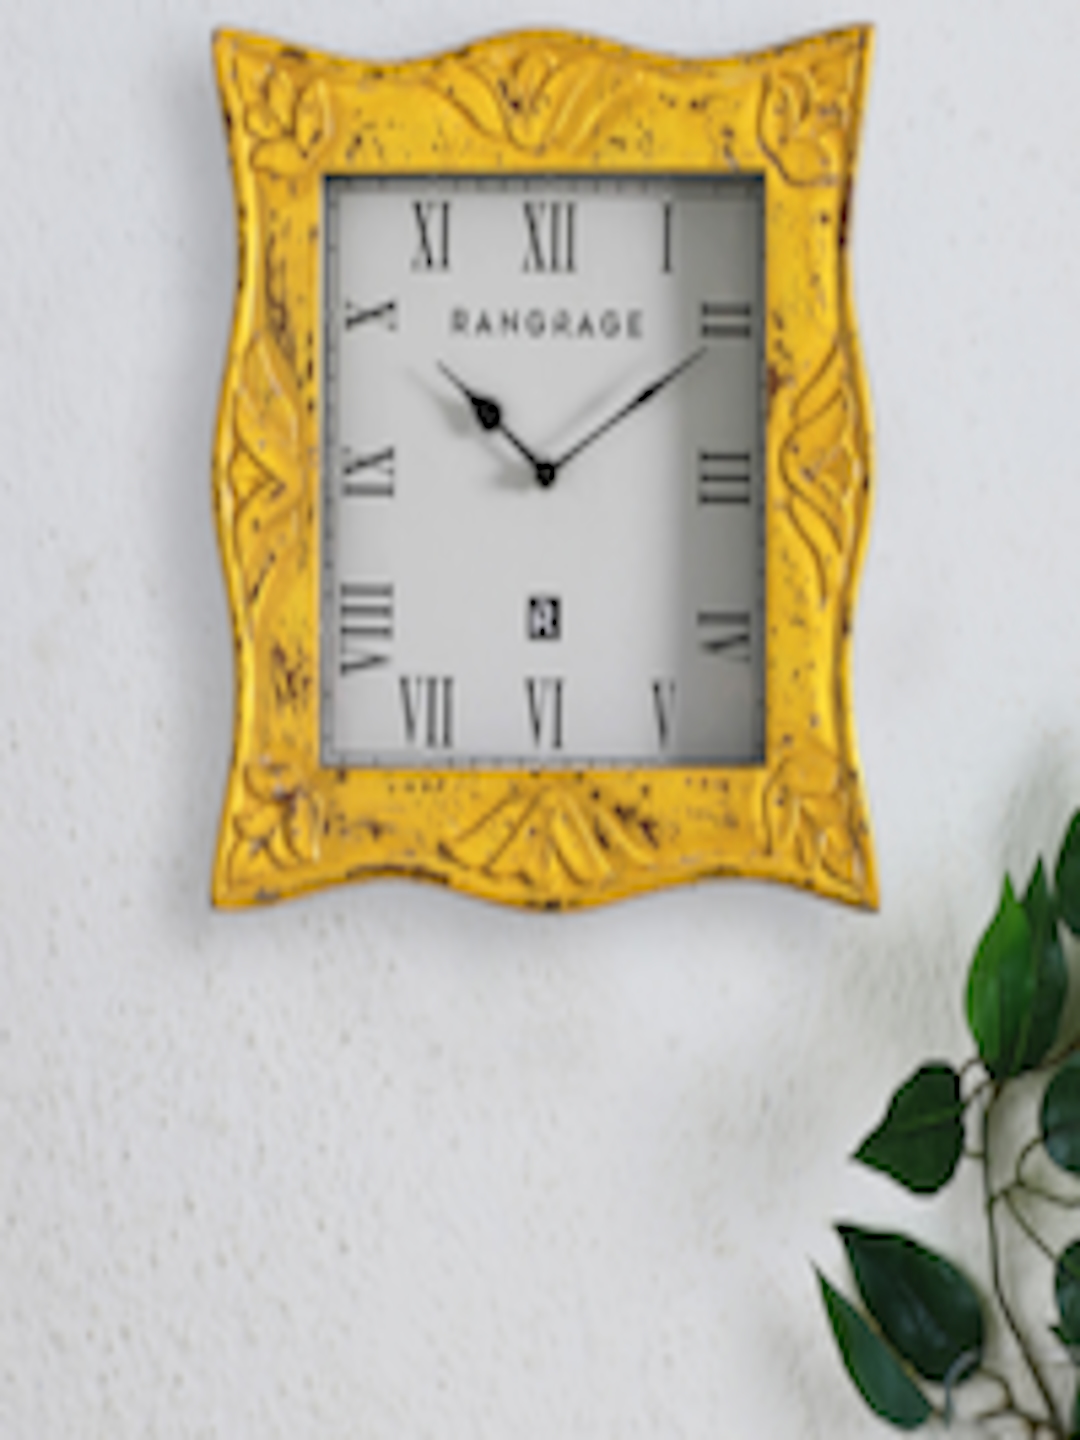 Buy RANGRAGE White & Yellow Square Textured 40.64 Cm Analogue Wall Clock Clocks for Unisex